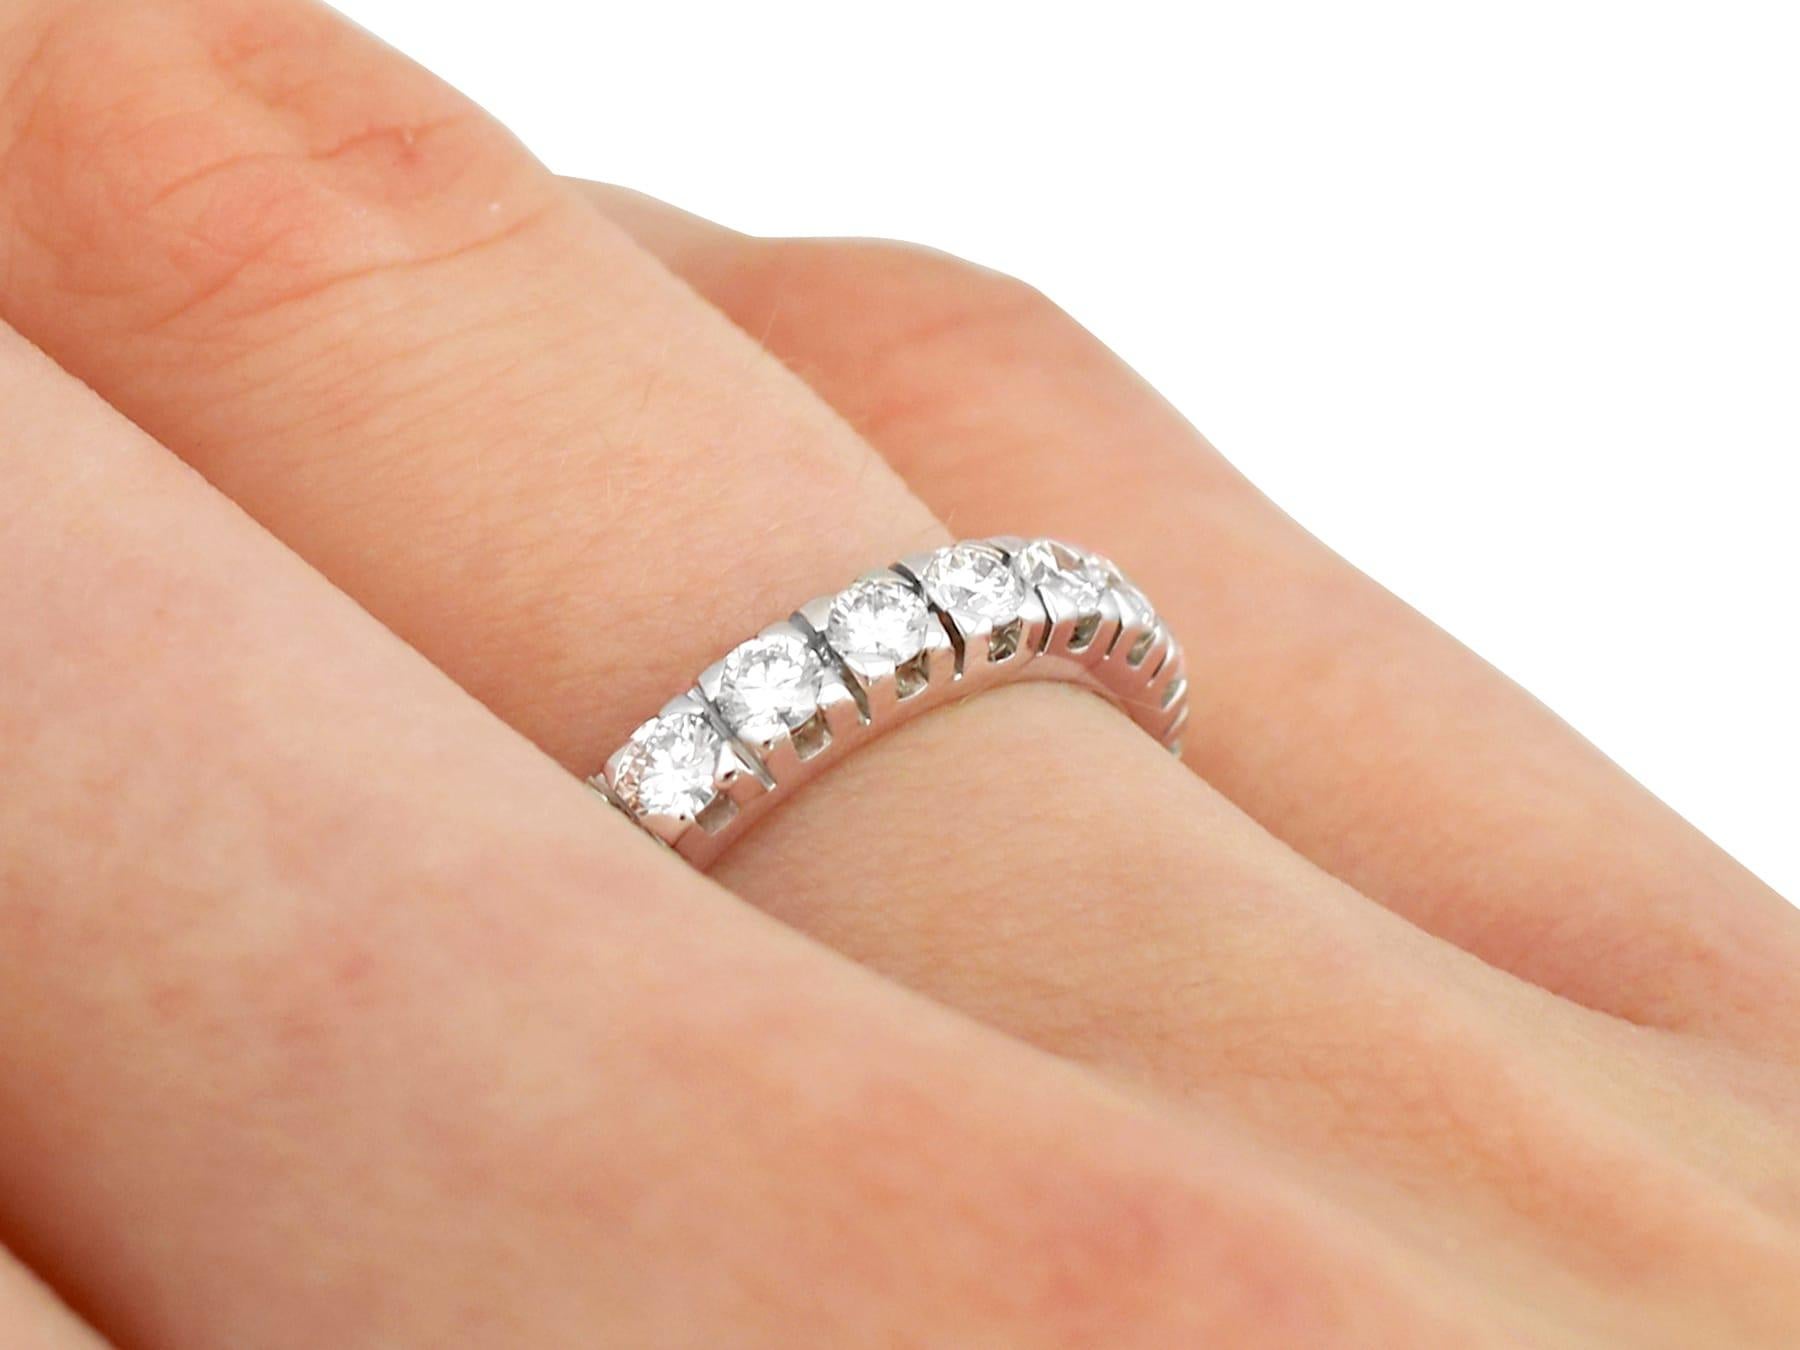 1980s Vintage 1.76 Carat Diamond and White Gold Full Eternity Ring For Sale 1